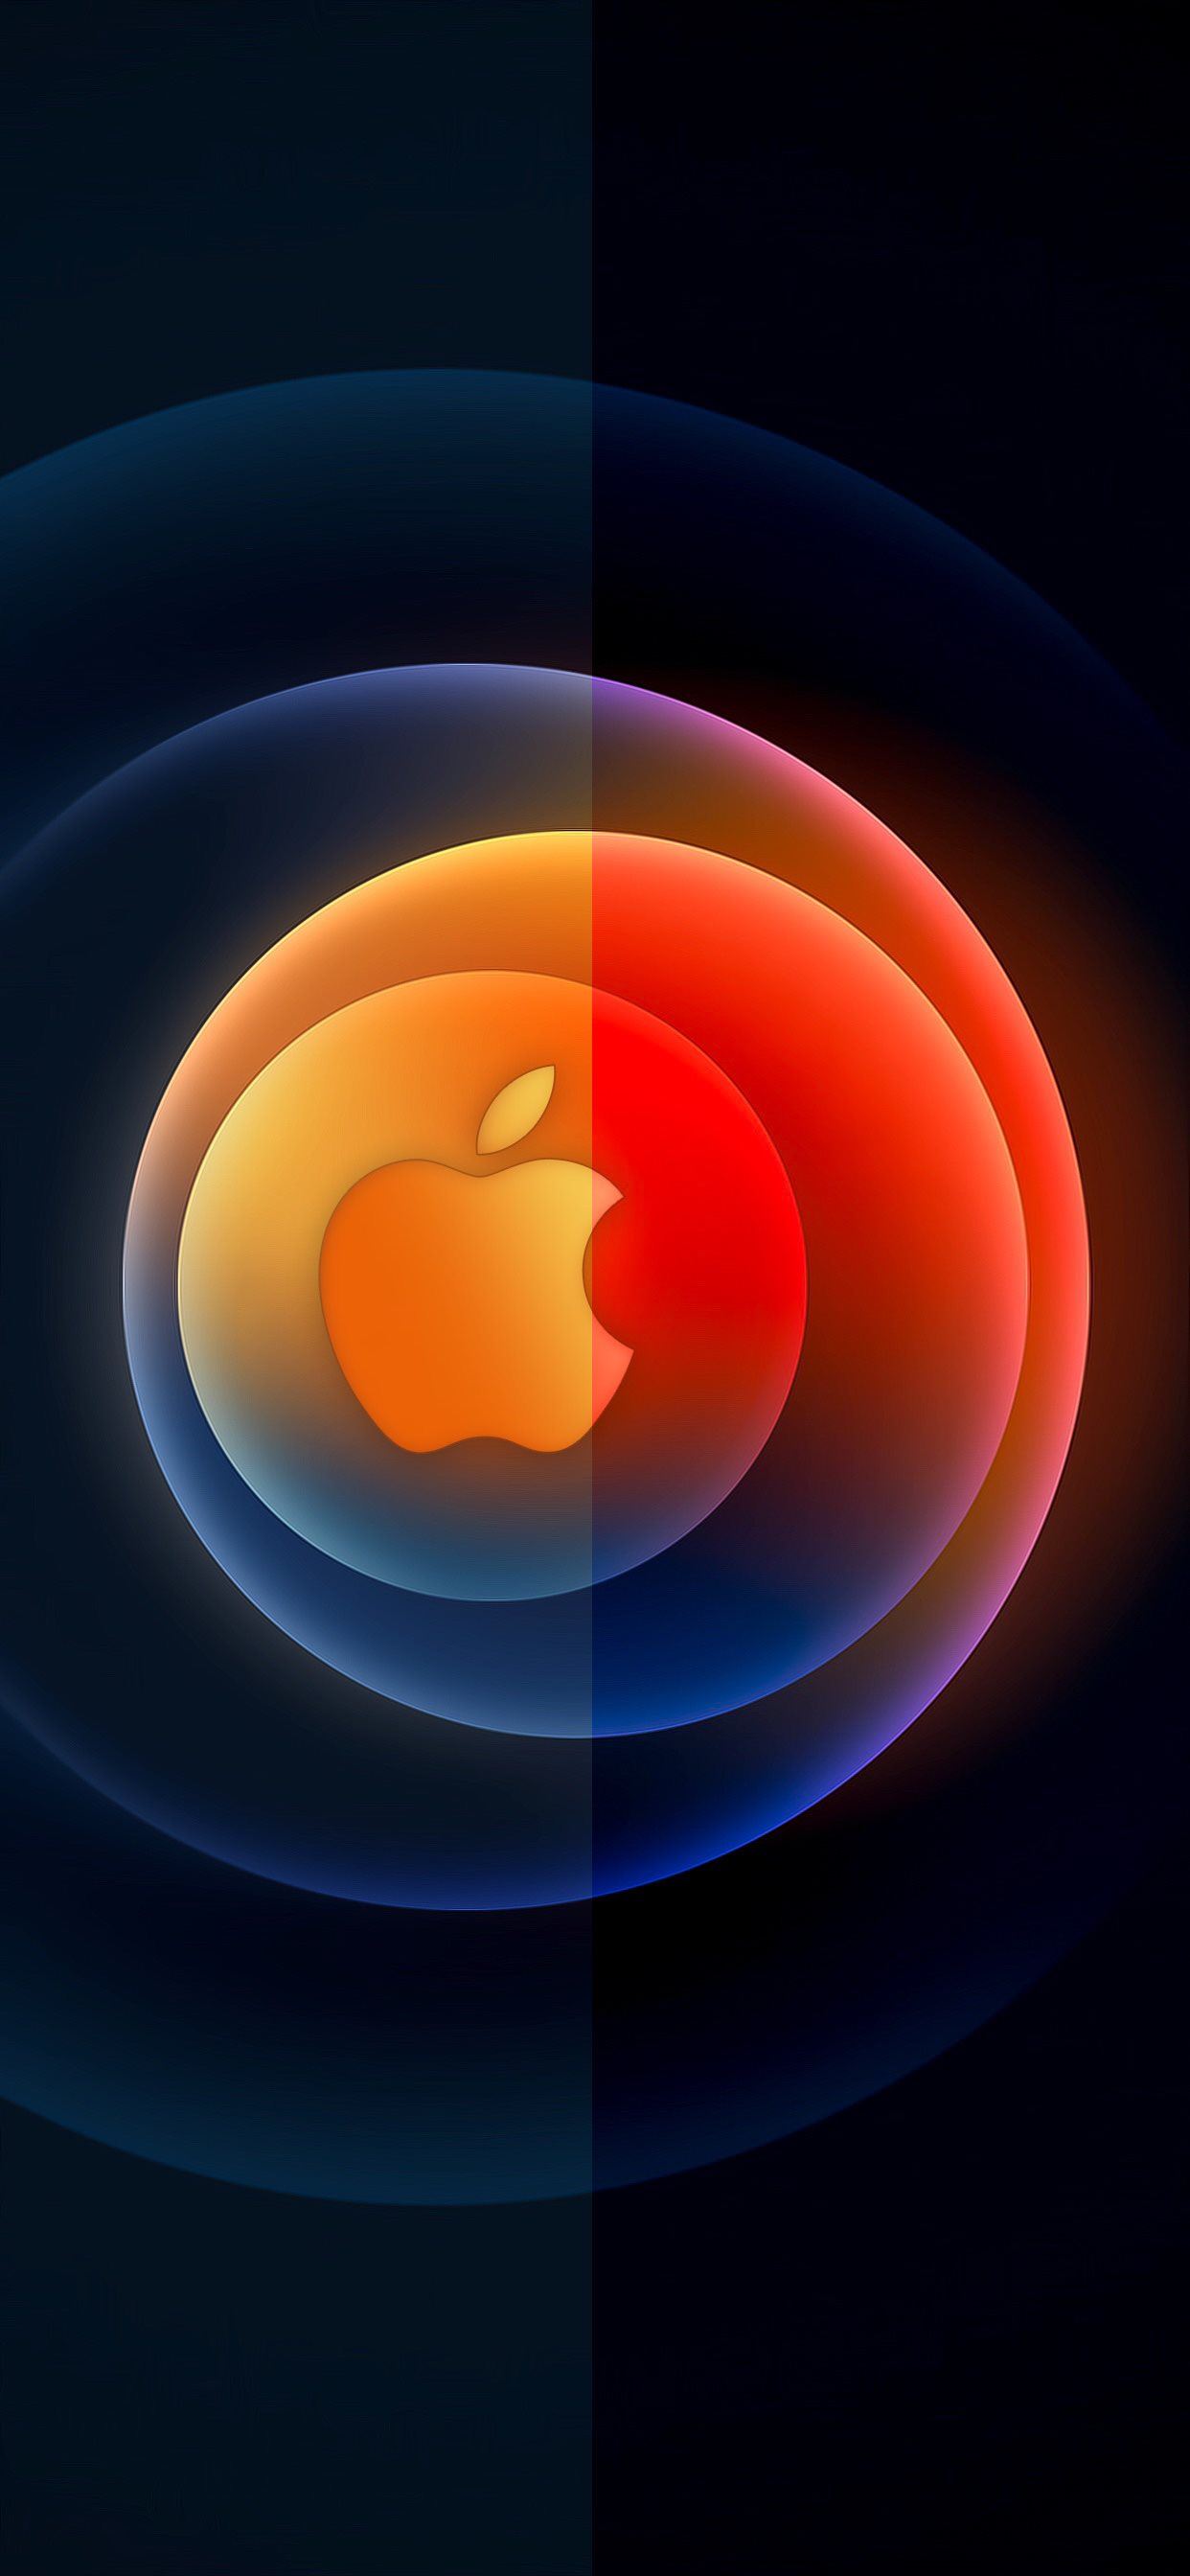 Apple Event 13 Oct DUO Logo by AR7 iPhone 11 Wallpaper Free Download